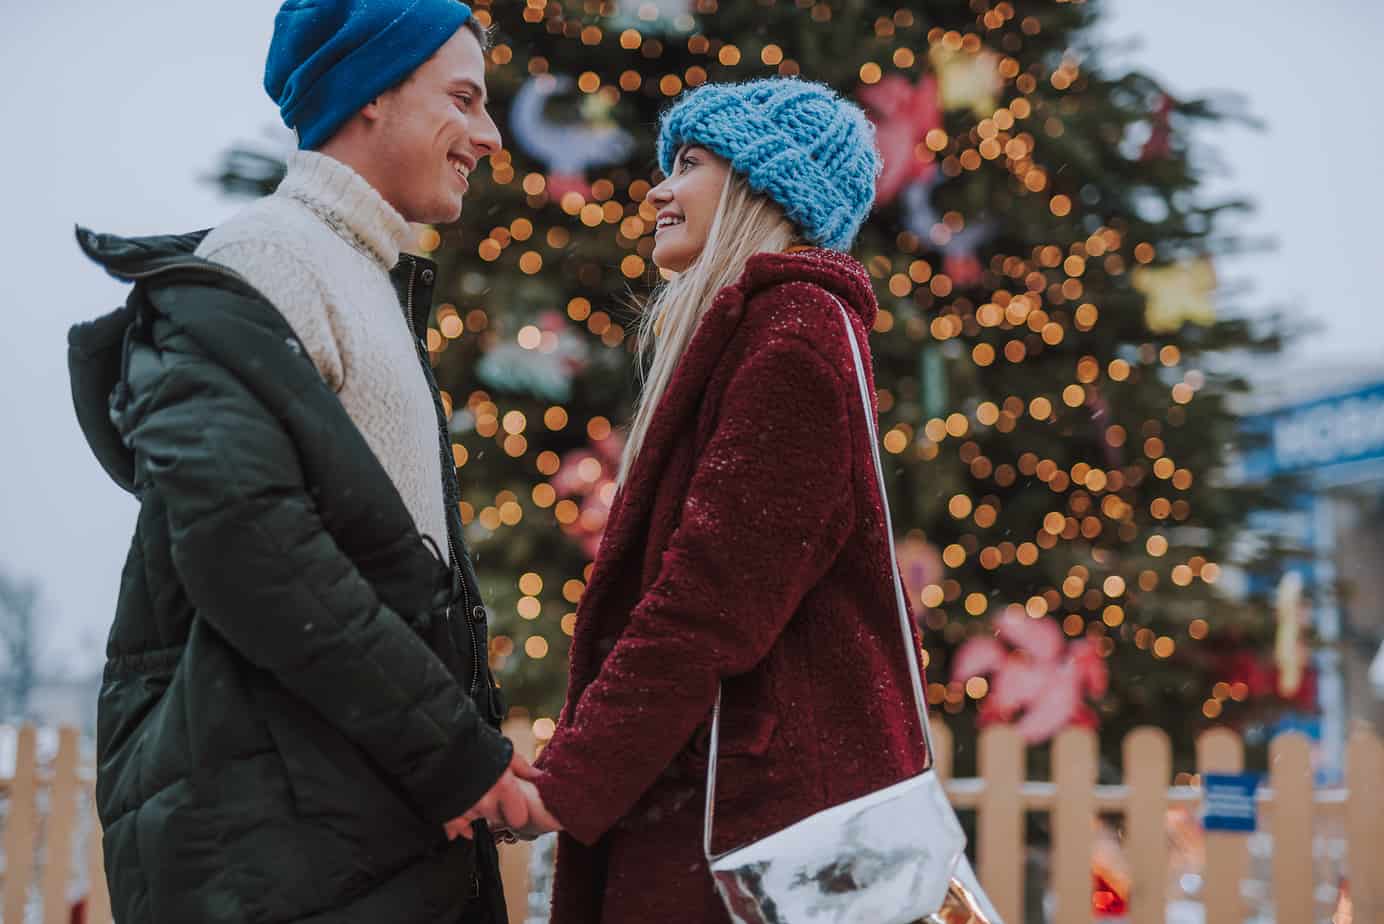 A couple holds hands while smiling at each other, with blurred our Christmas trees behind them.